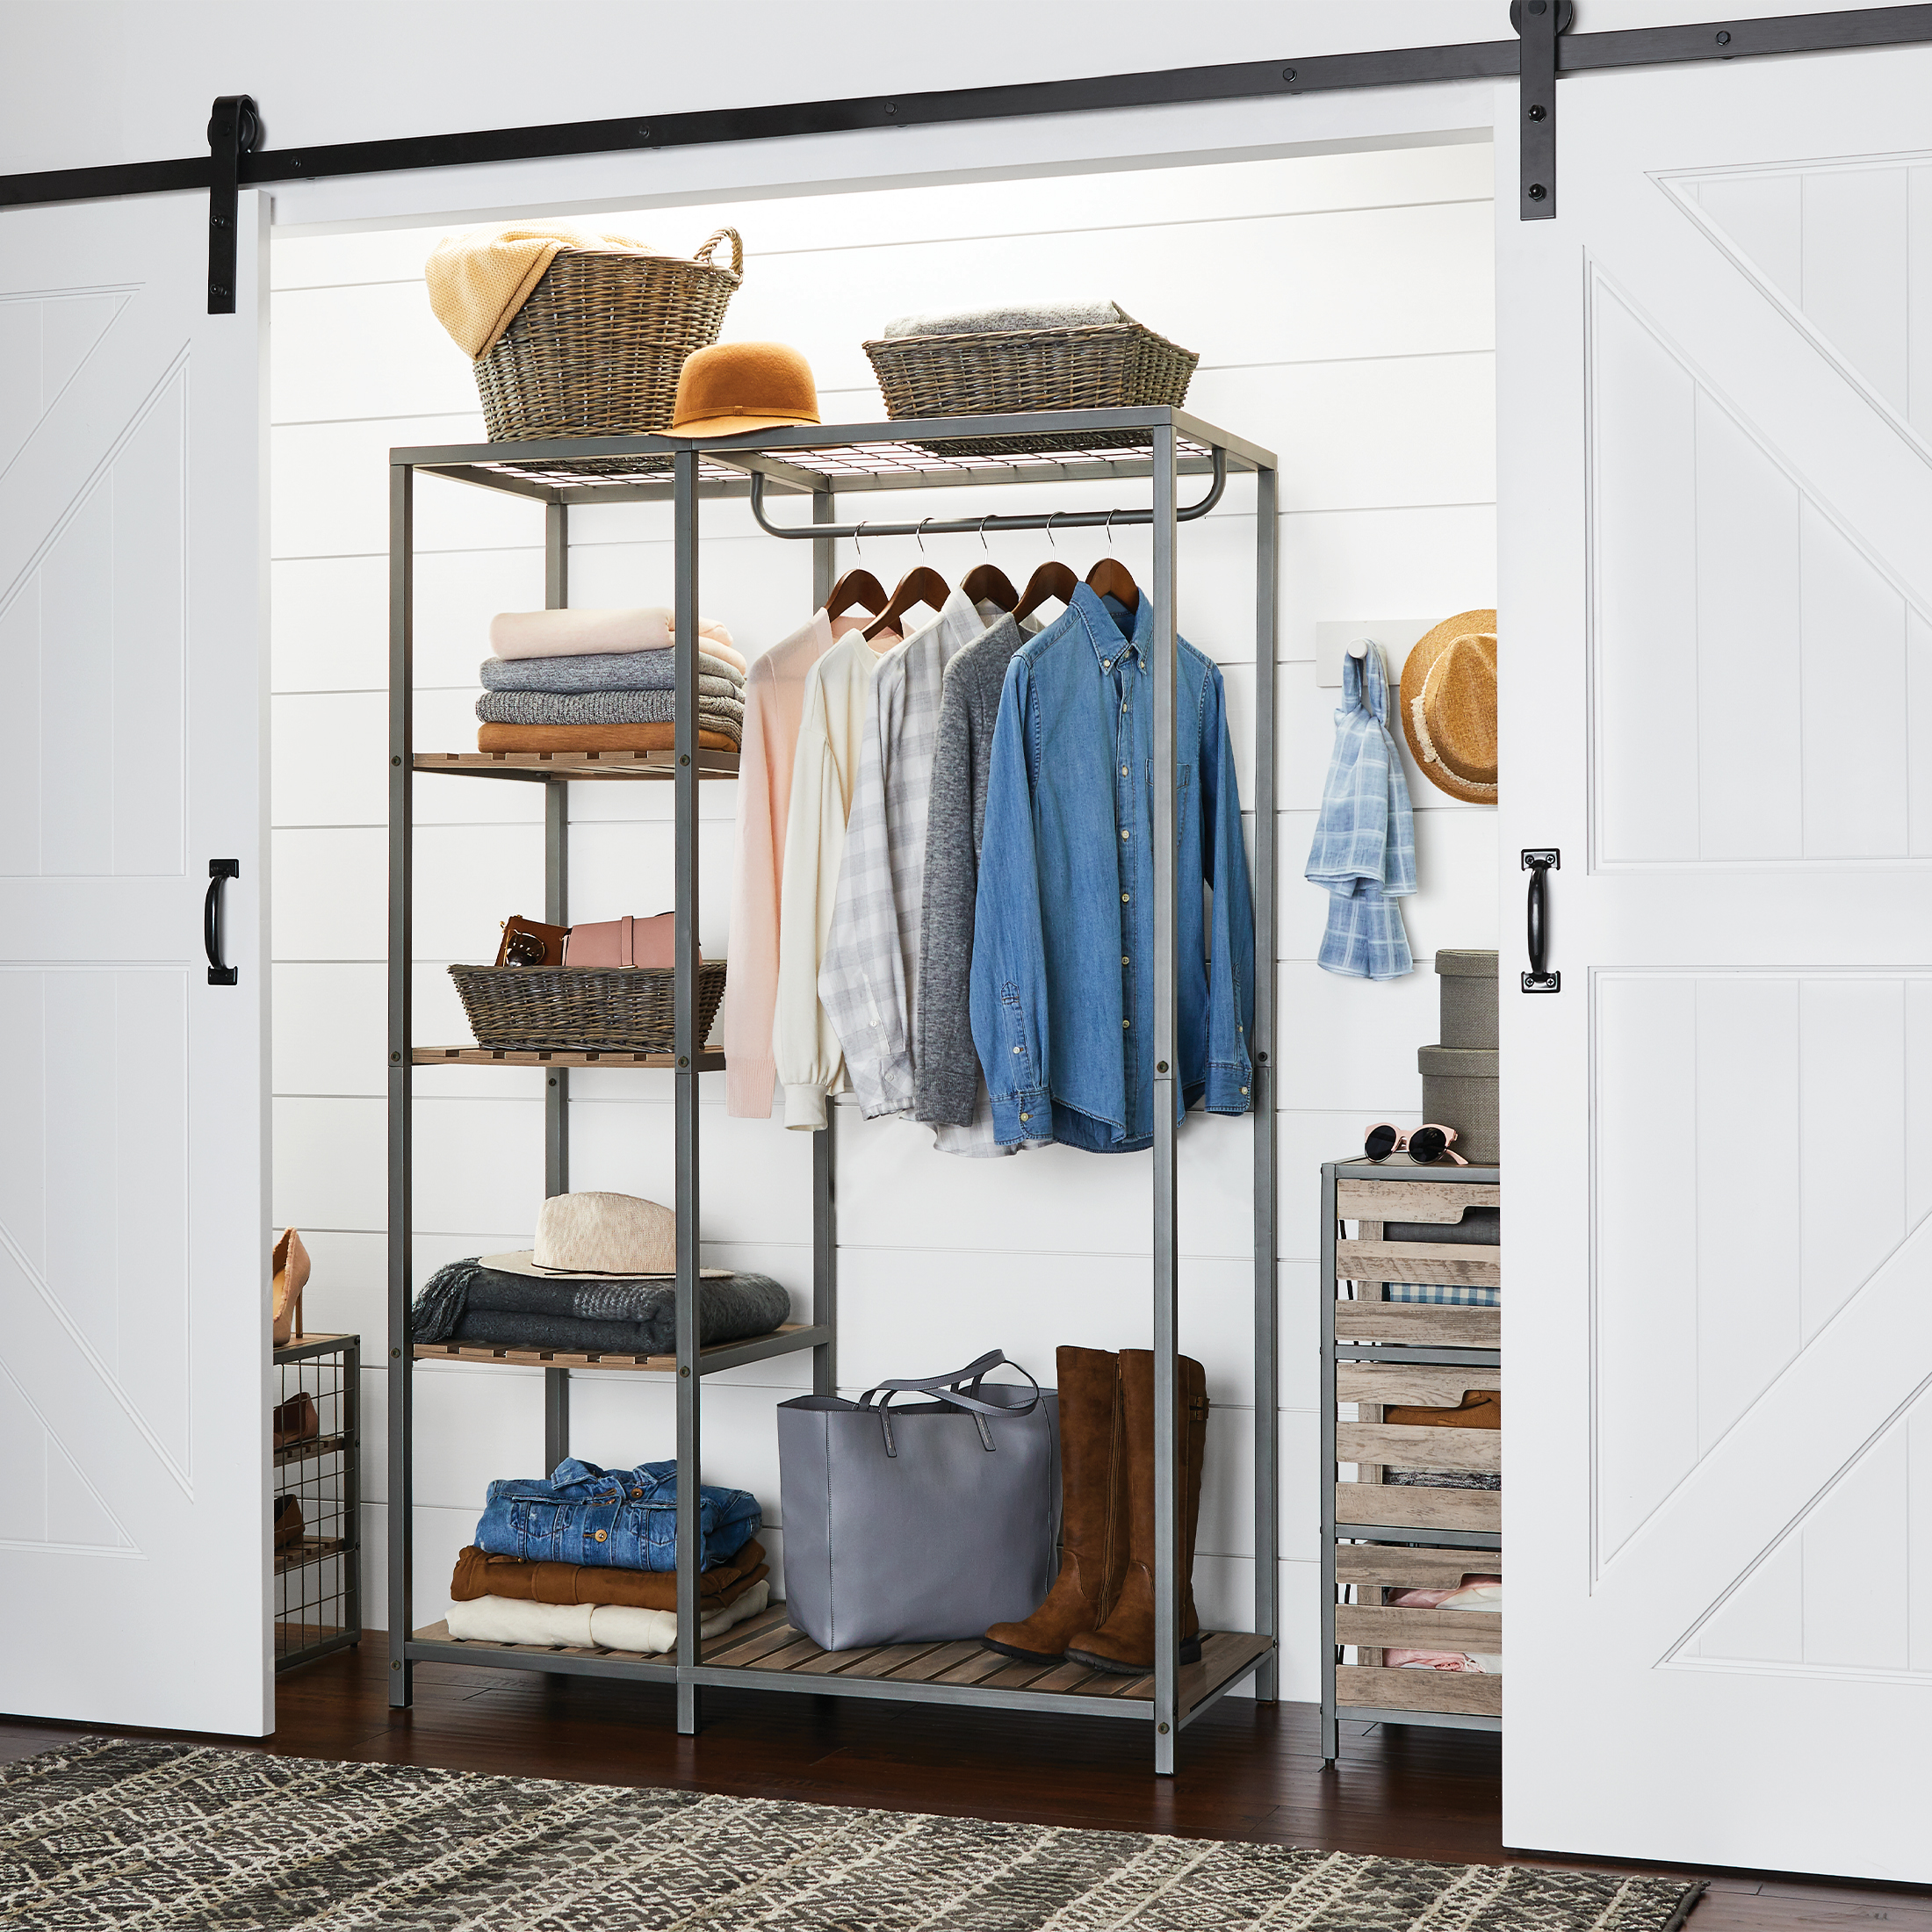 Better Homes & Gardens Farmhouse Gray Wood and Metal Garment Rack - image 1 of 7